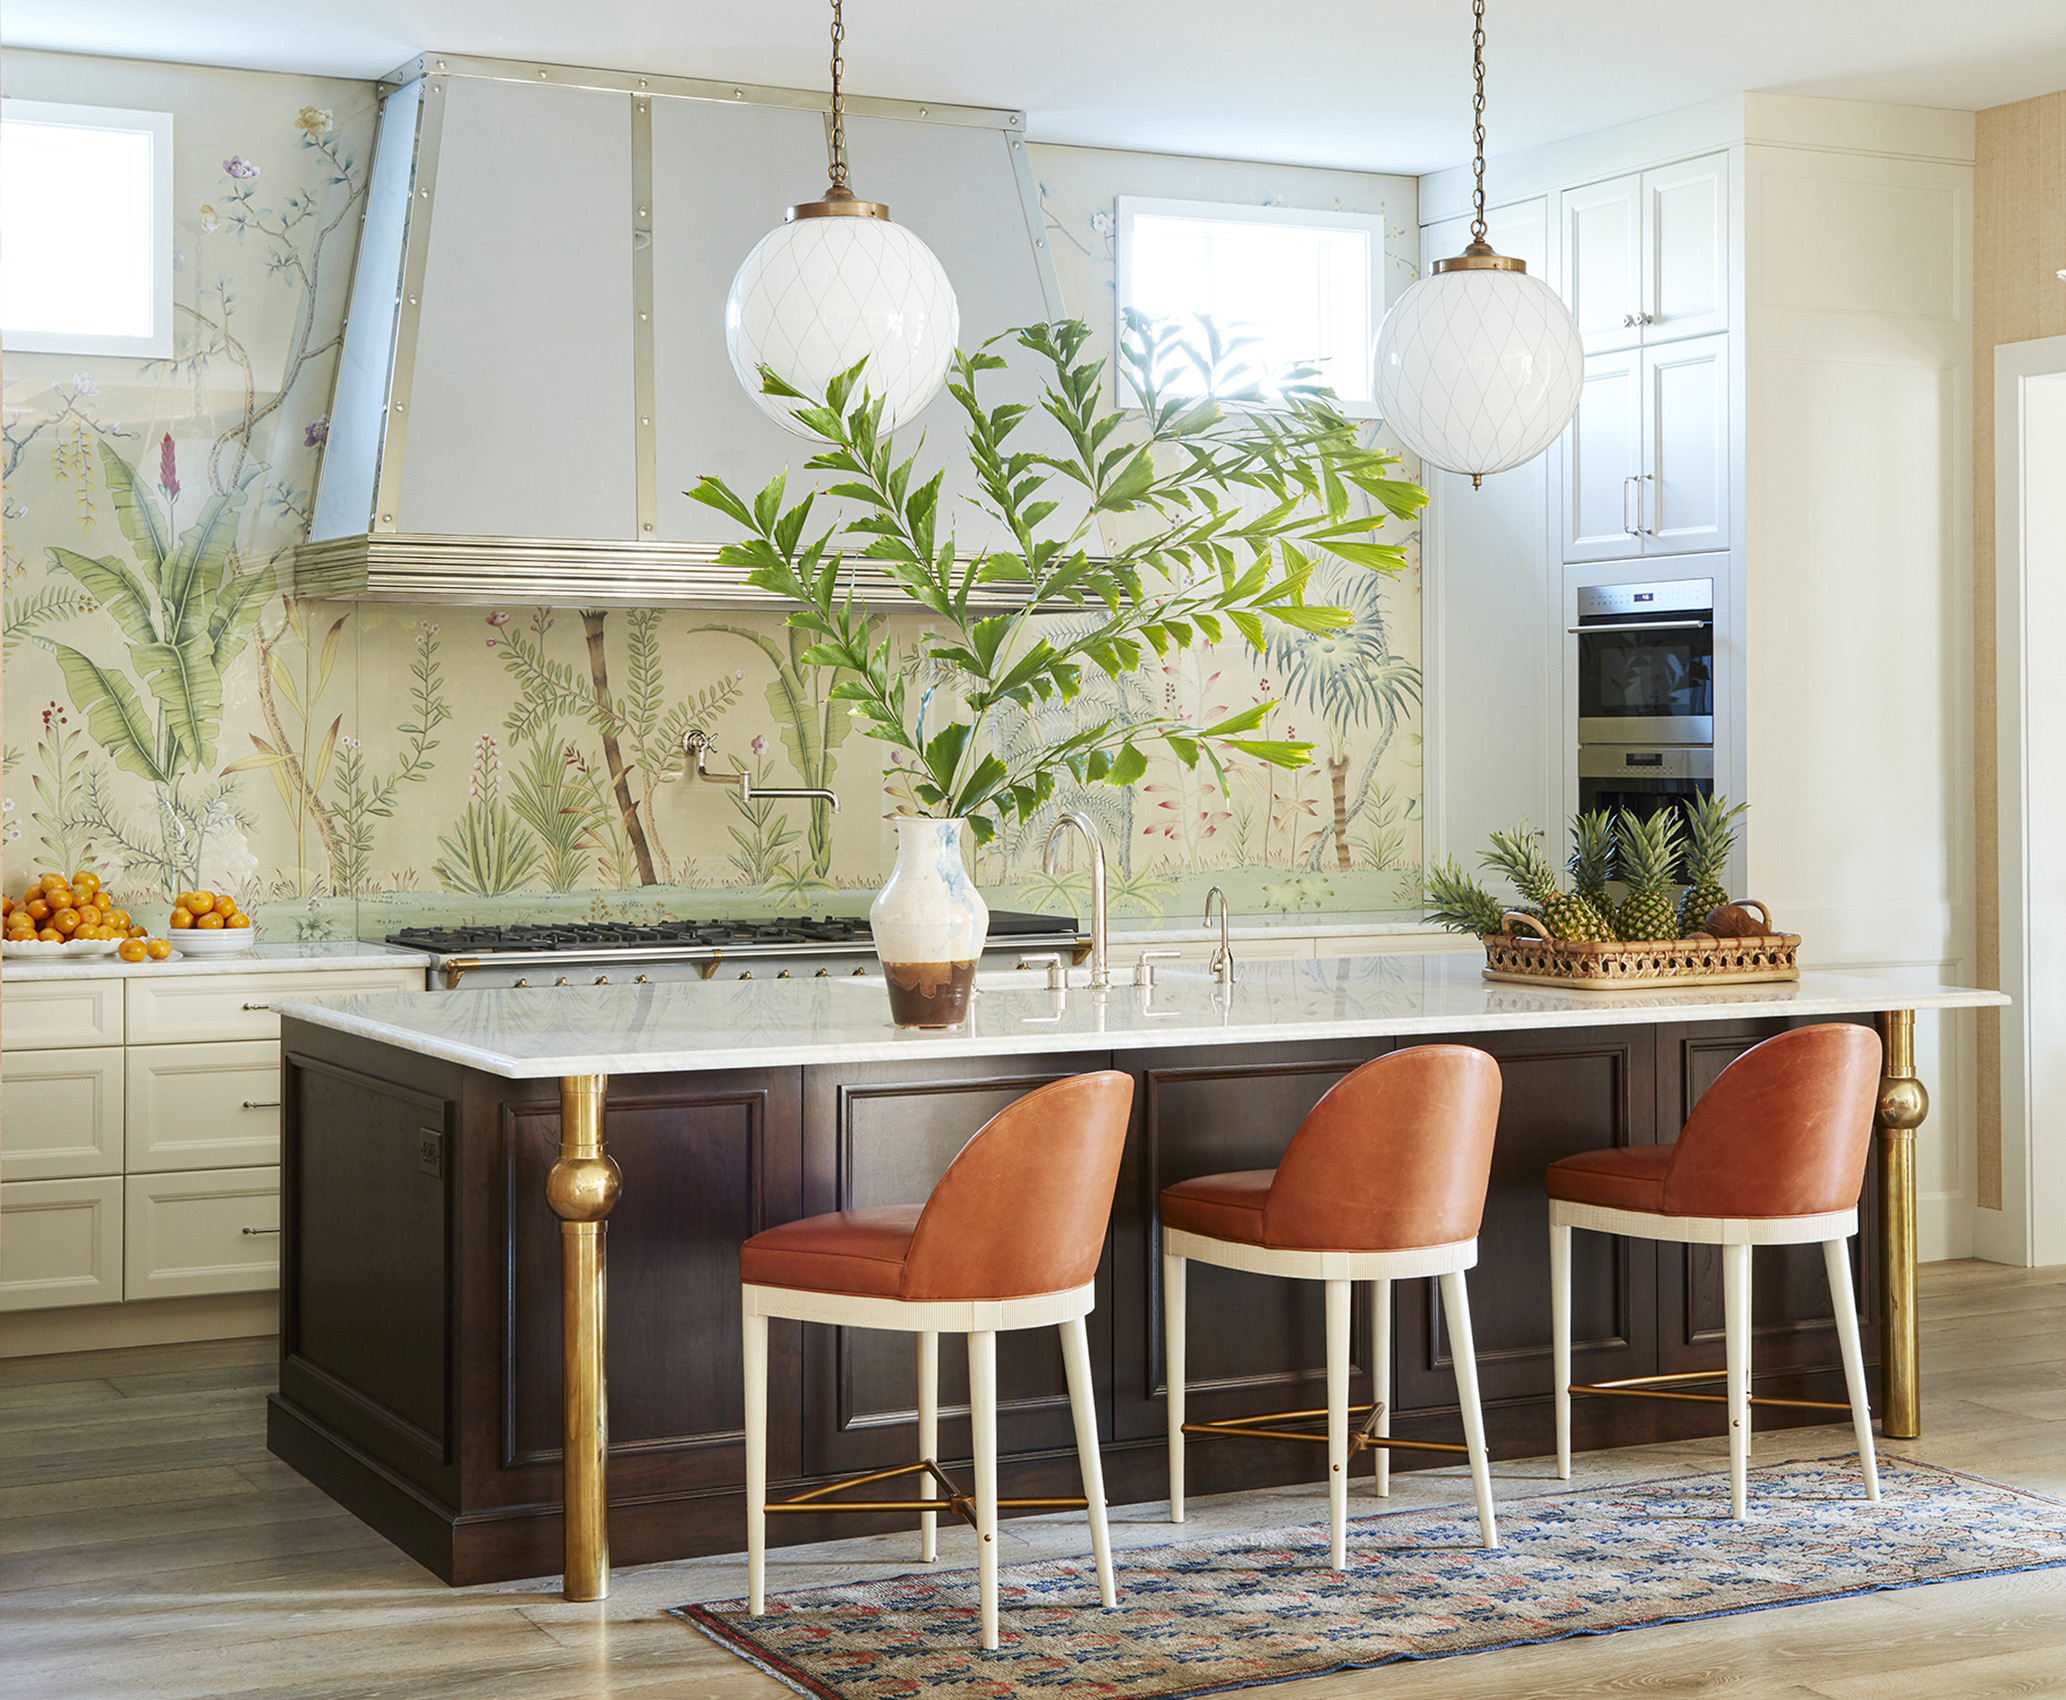 Kitchen design by Summer Thornton creates visual interest in this Old Naples Florida home with de Gournay wallpaper backsplash